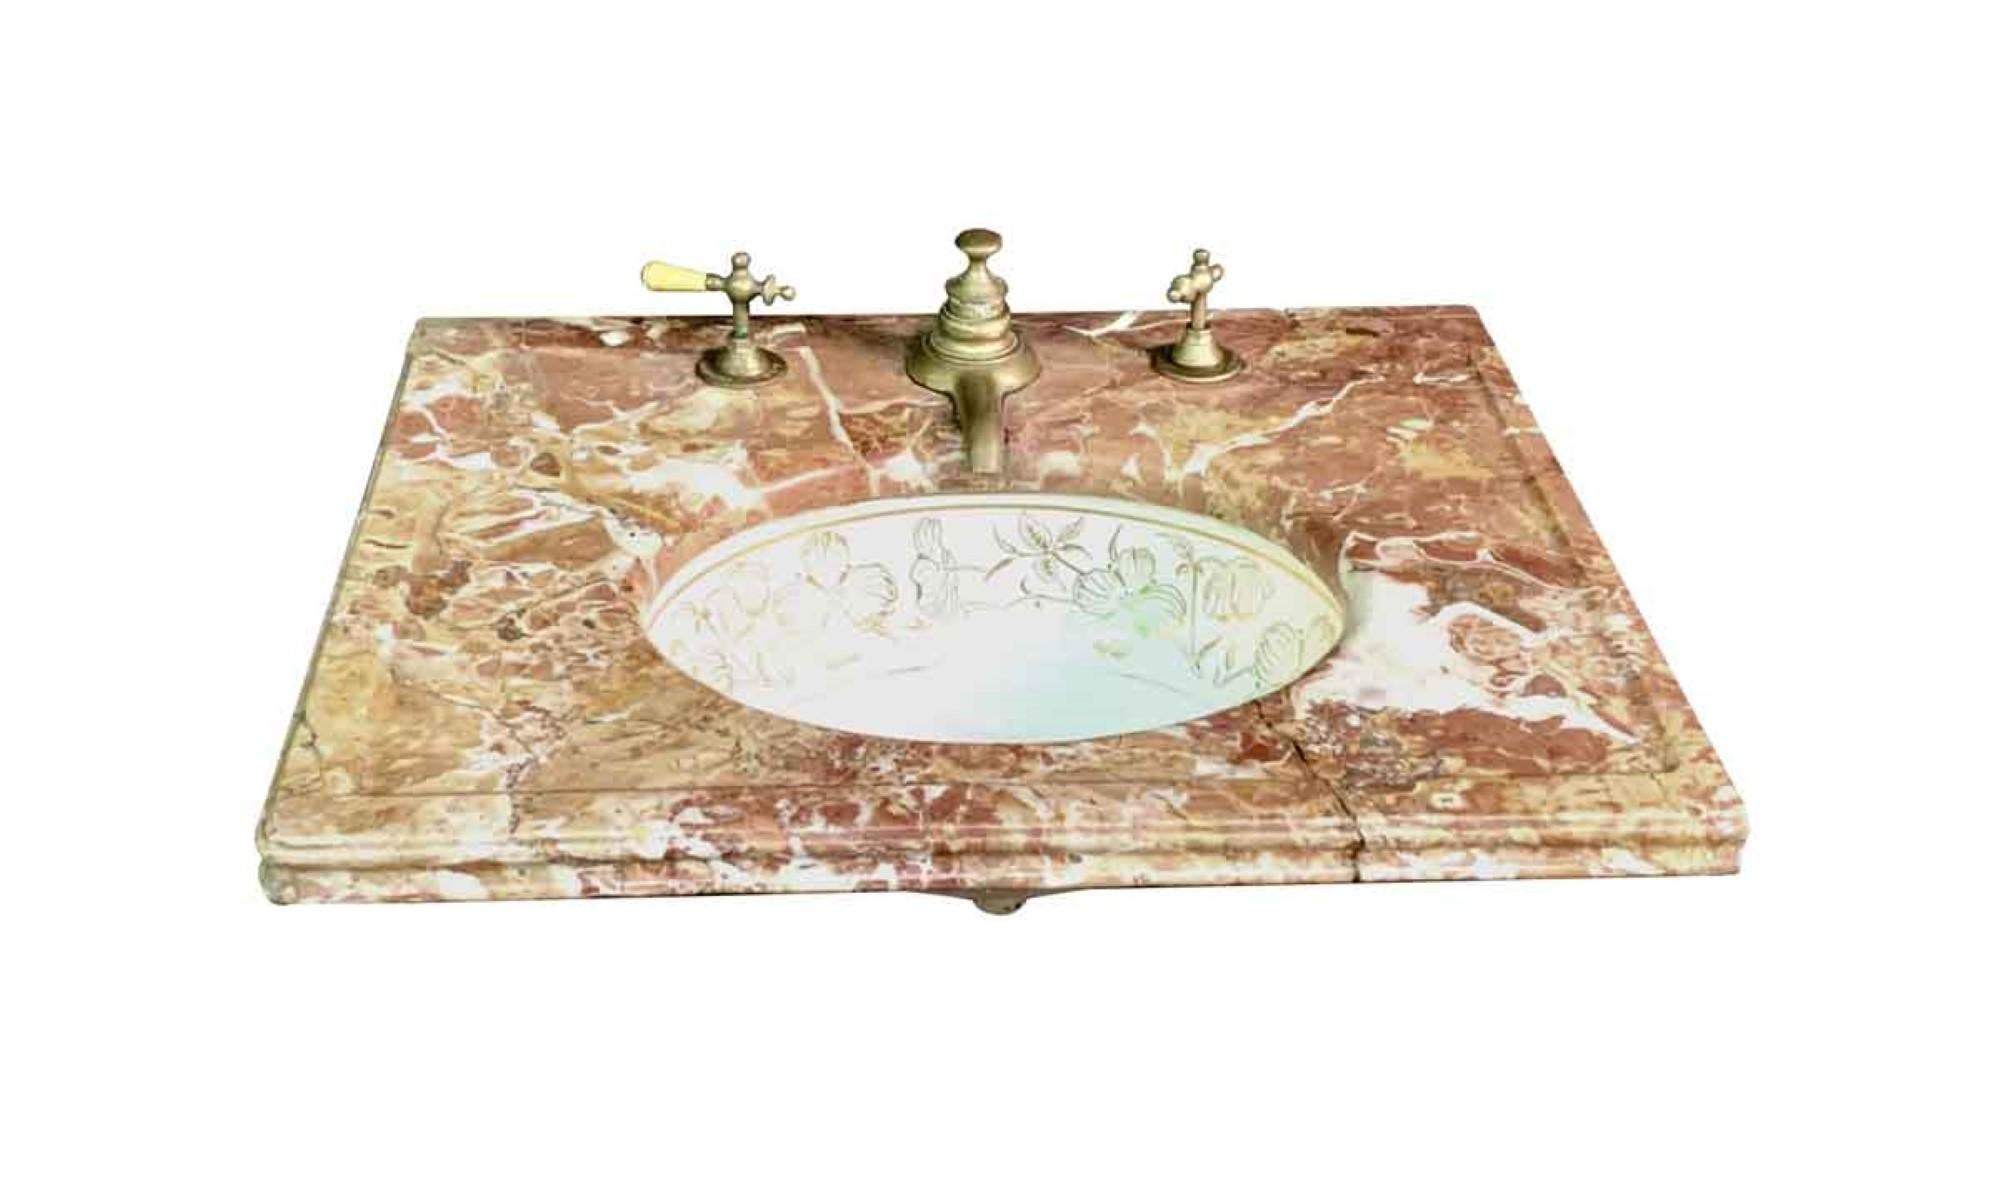 1980s bathroom vanity top with a single basin. The marble vanity top consists of tones of deep brown, amber, white, and red veining, and the white sink has a gold floral design around it. The original handle and faucet hardware are included. One